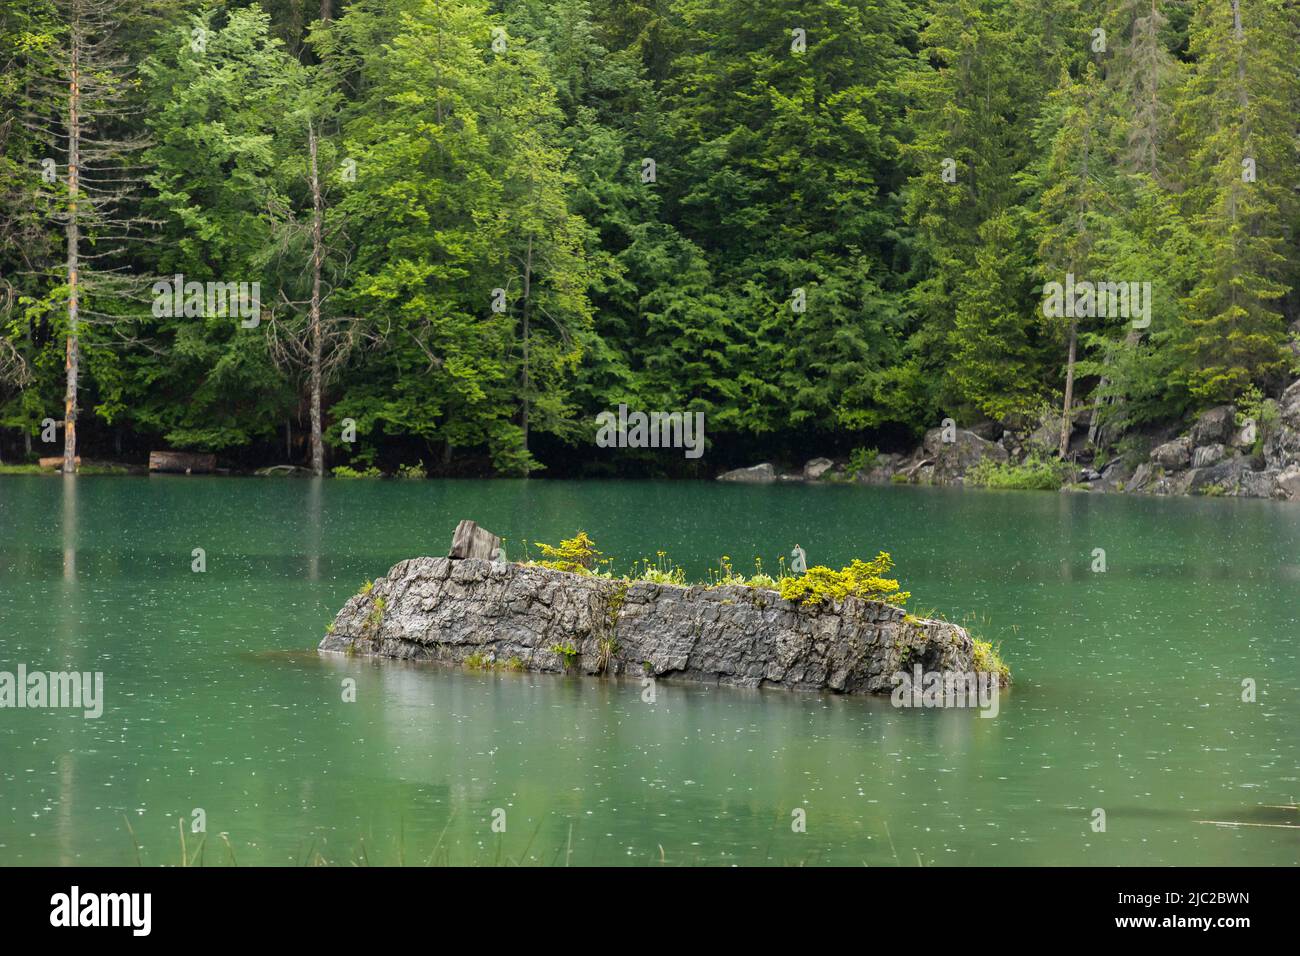 June 2, 2022, Passy, France, France: Passy, France June 2, 2022 - Rain  falls on the Lac Vert in the Haute Savoie department. The emerald green  color of the water is due